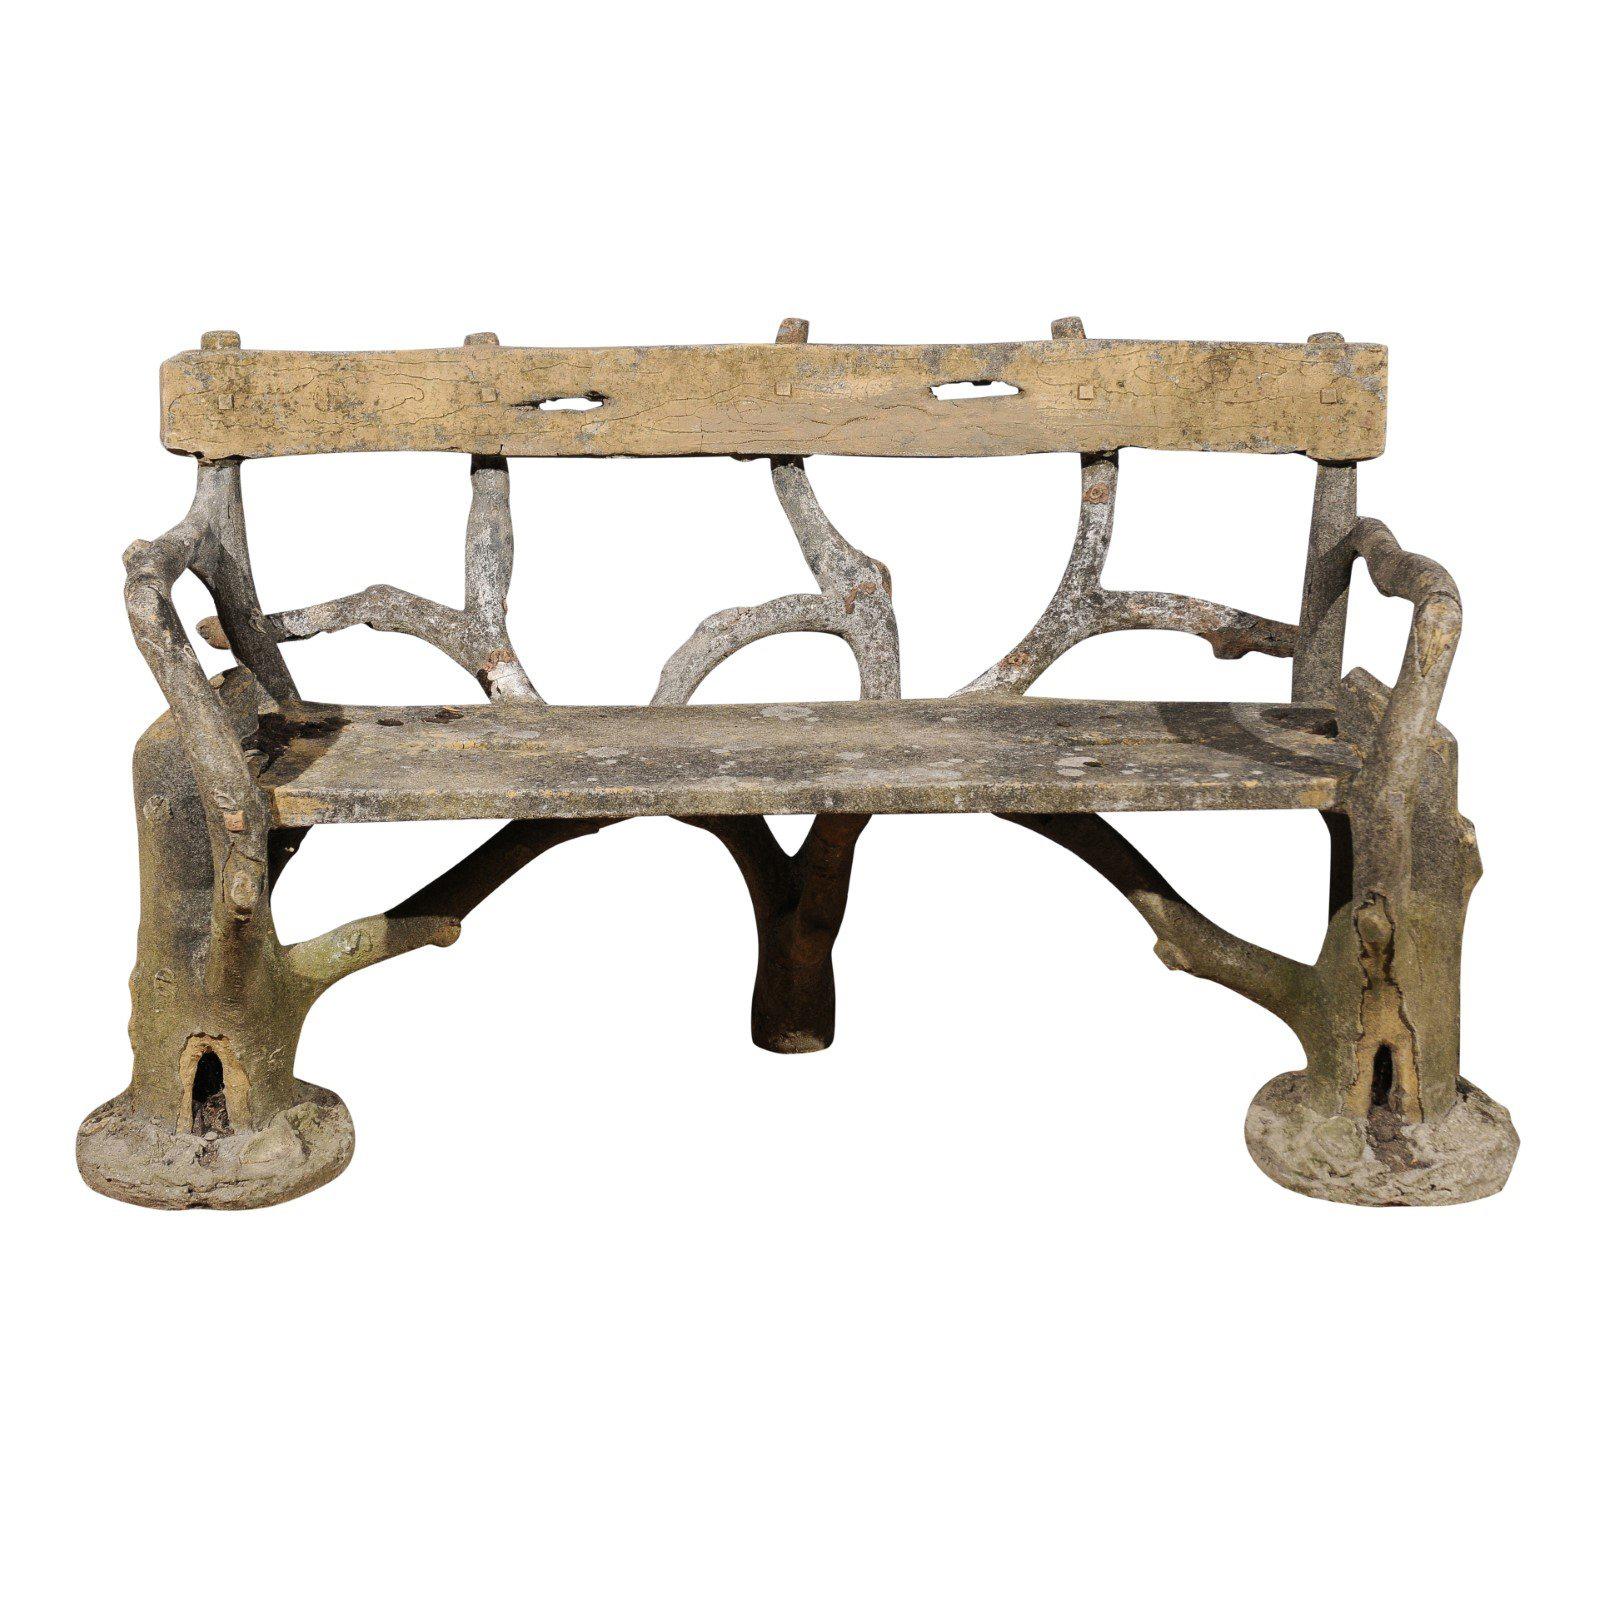 French Late 19th Century Faux-Bois Concrete Bench with Vases Flanking the Sides For Sale